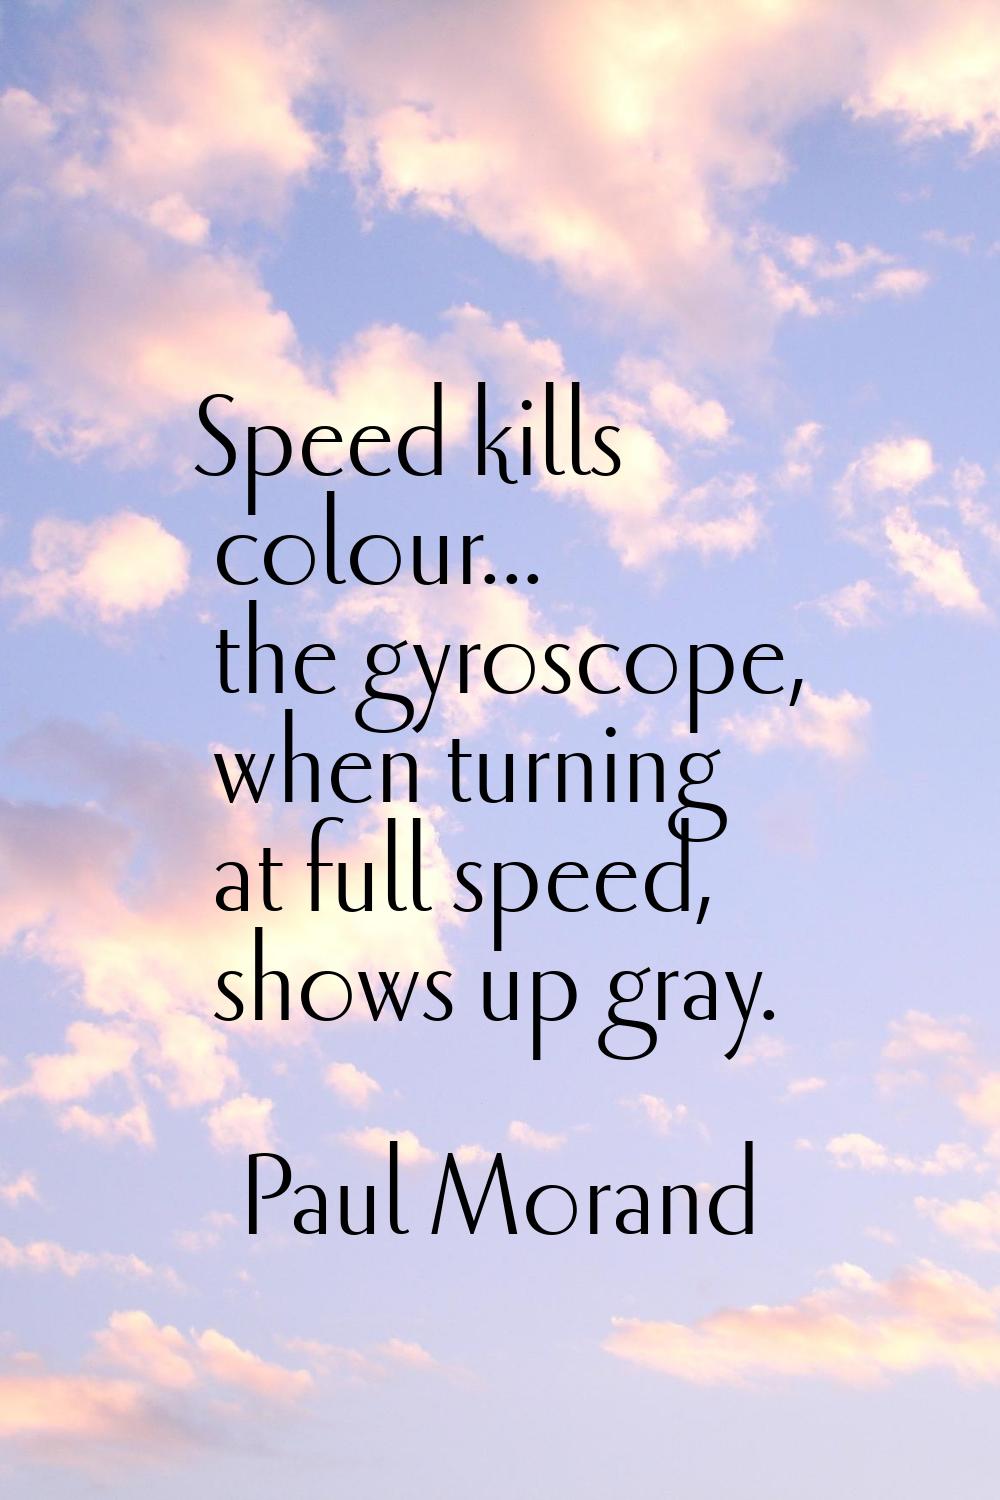 Speed kills colour... the gyroscope, when turning at full speed, shows up gray.